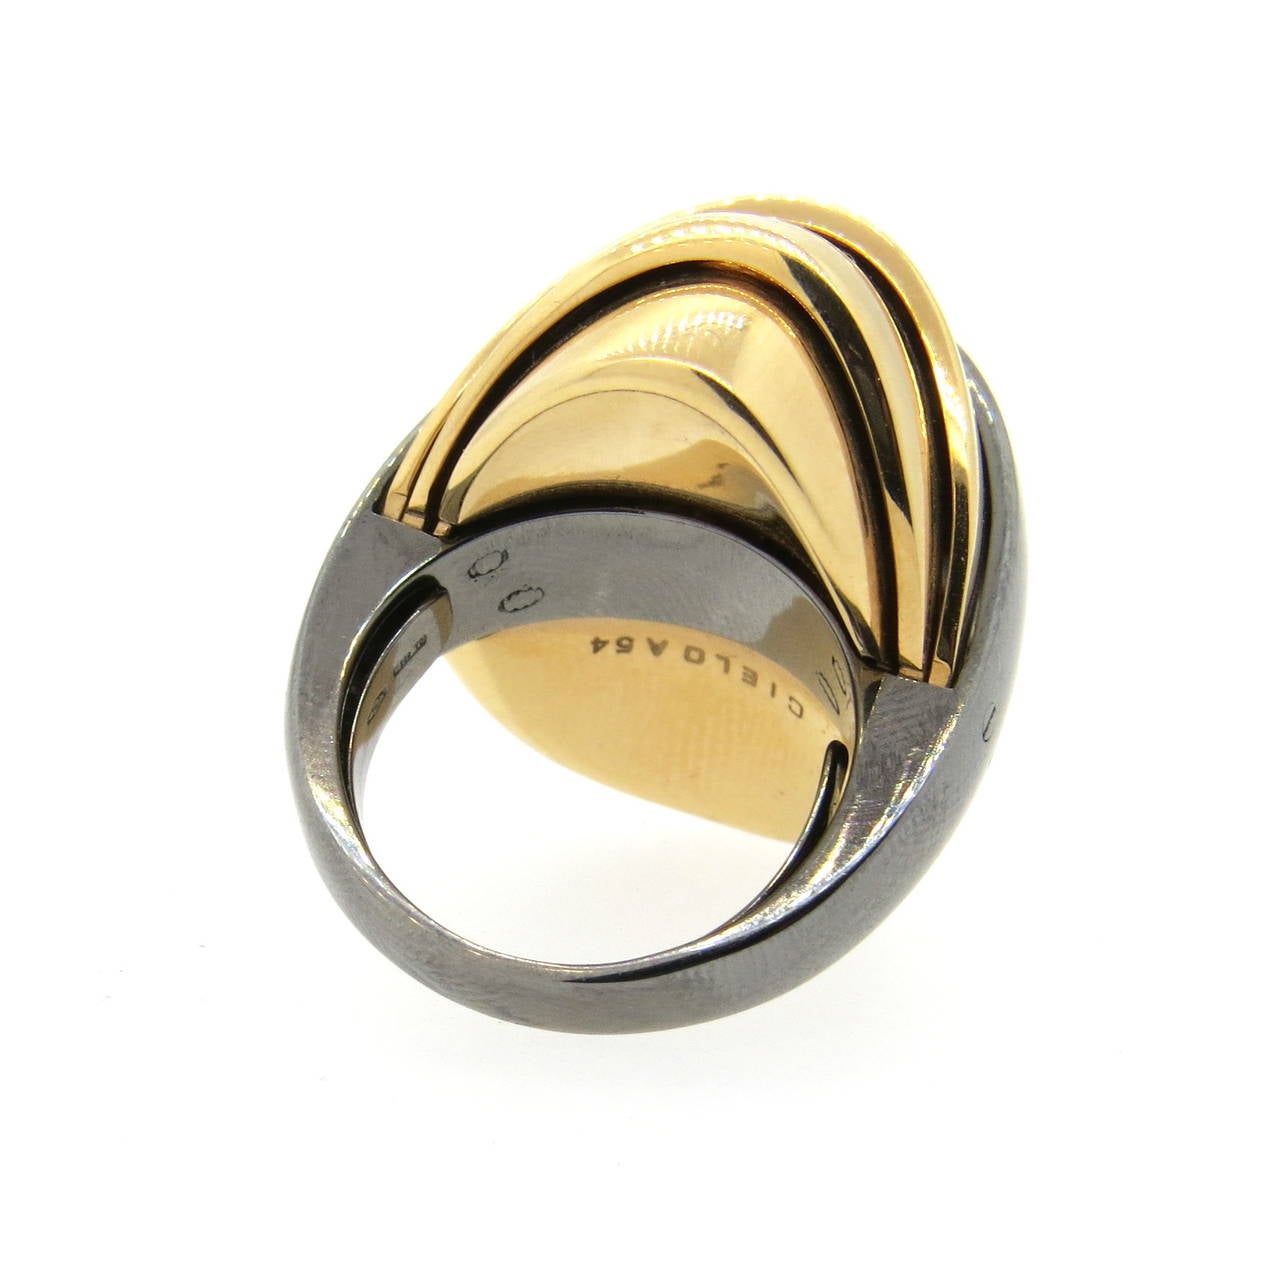 18k gold two tone ring by Mattia Cielo from Armadillo collection, featuring movable top. Ring is a size 6 3/4, ring top is 28m wide, ring sits approx. 18mm from the finger. Marked 750,Italian gold mark and CIelo A54. Weight - 27.8 grams.